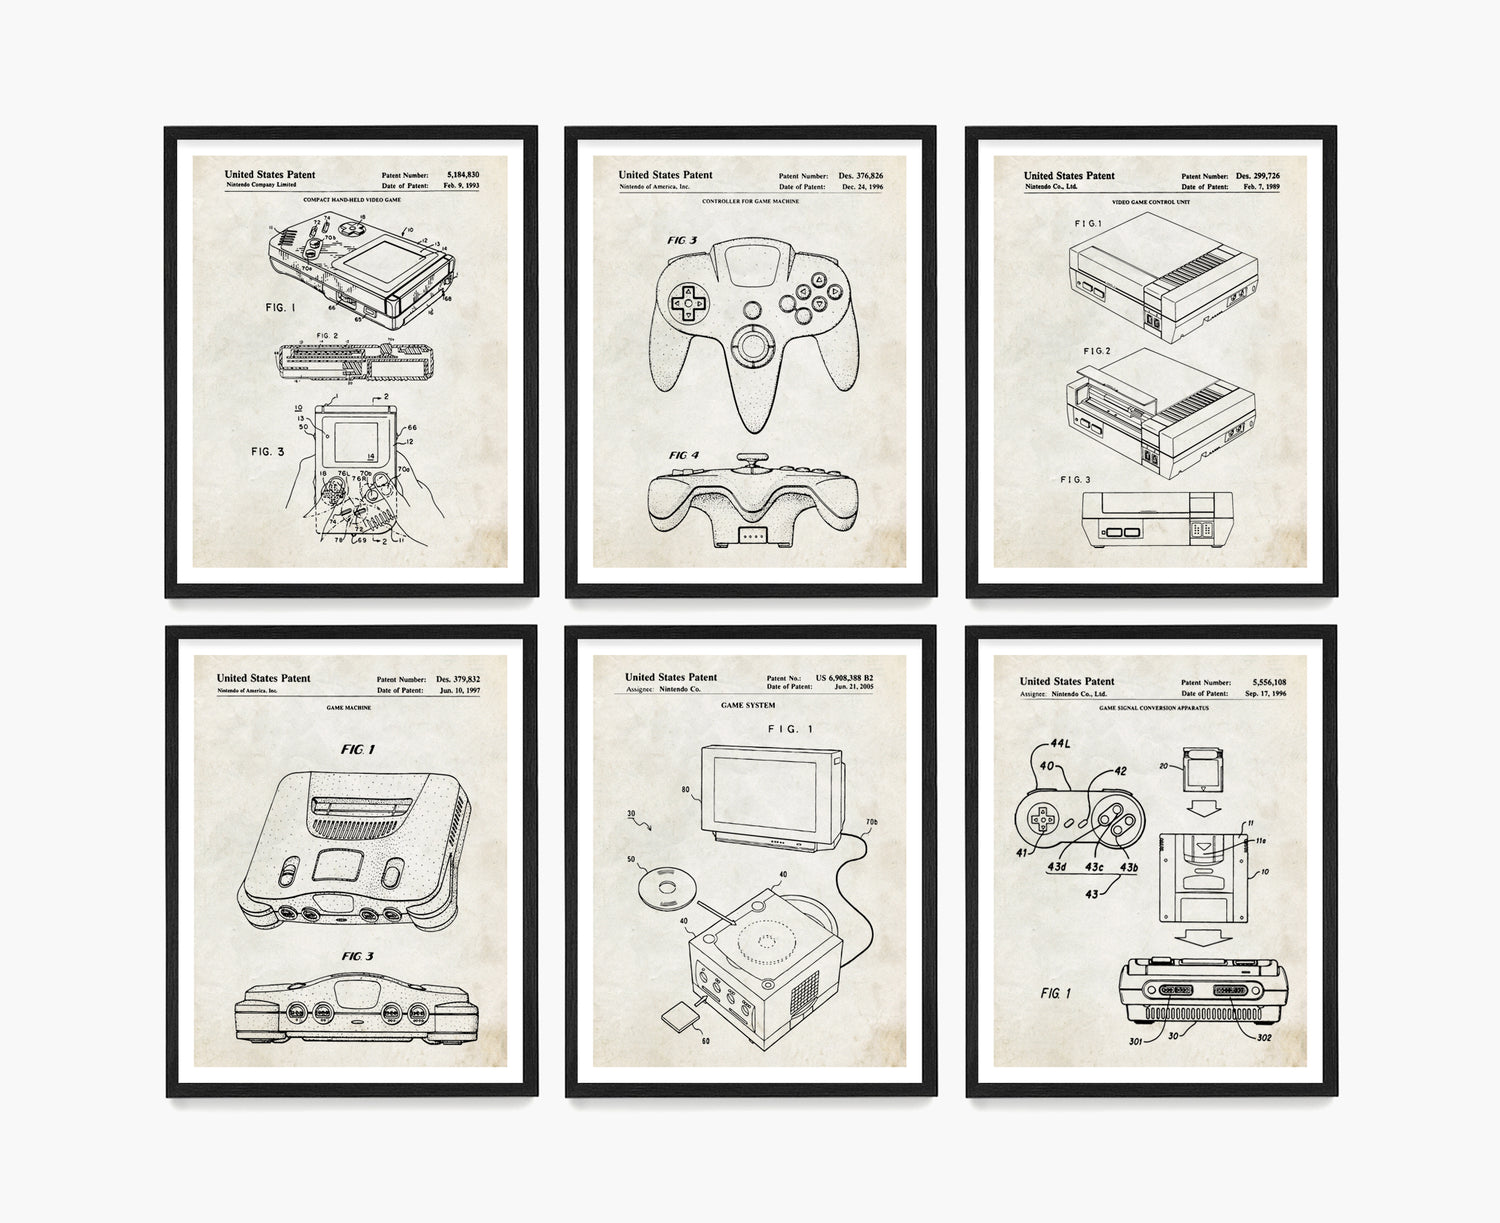 Technology/ Video Game Patents